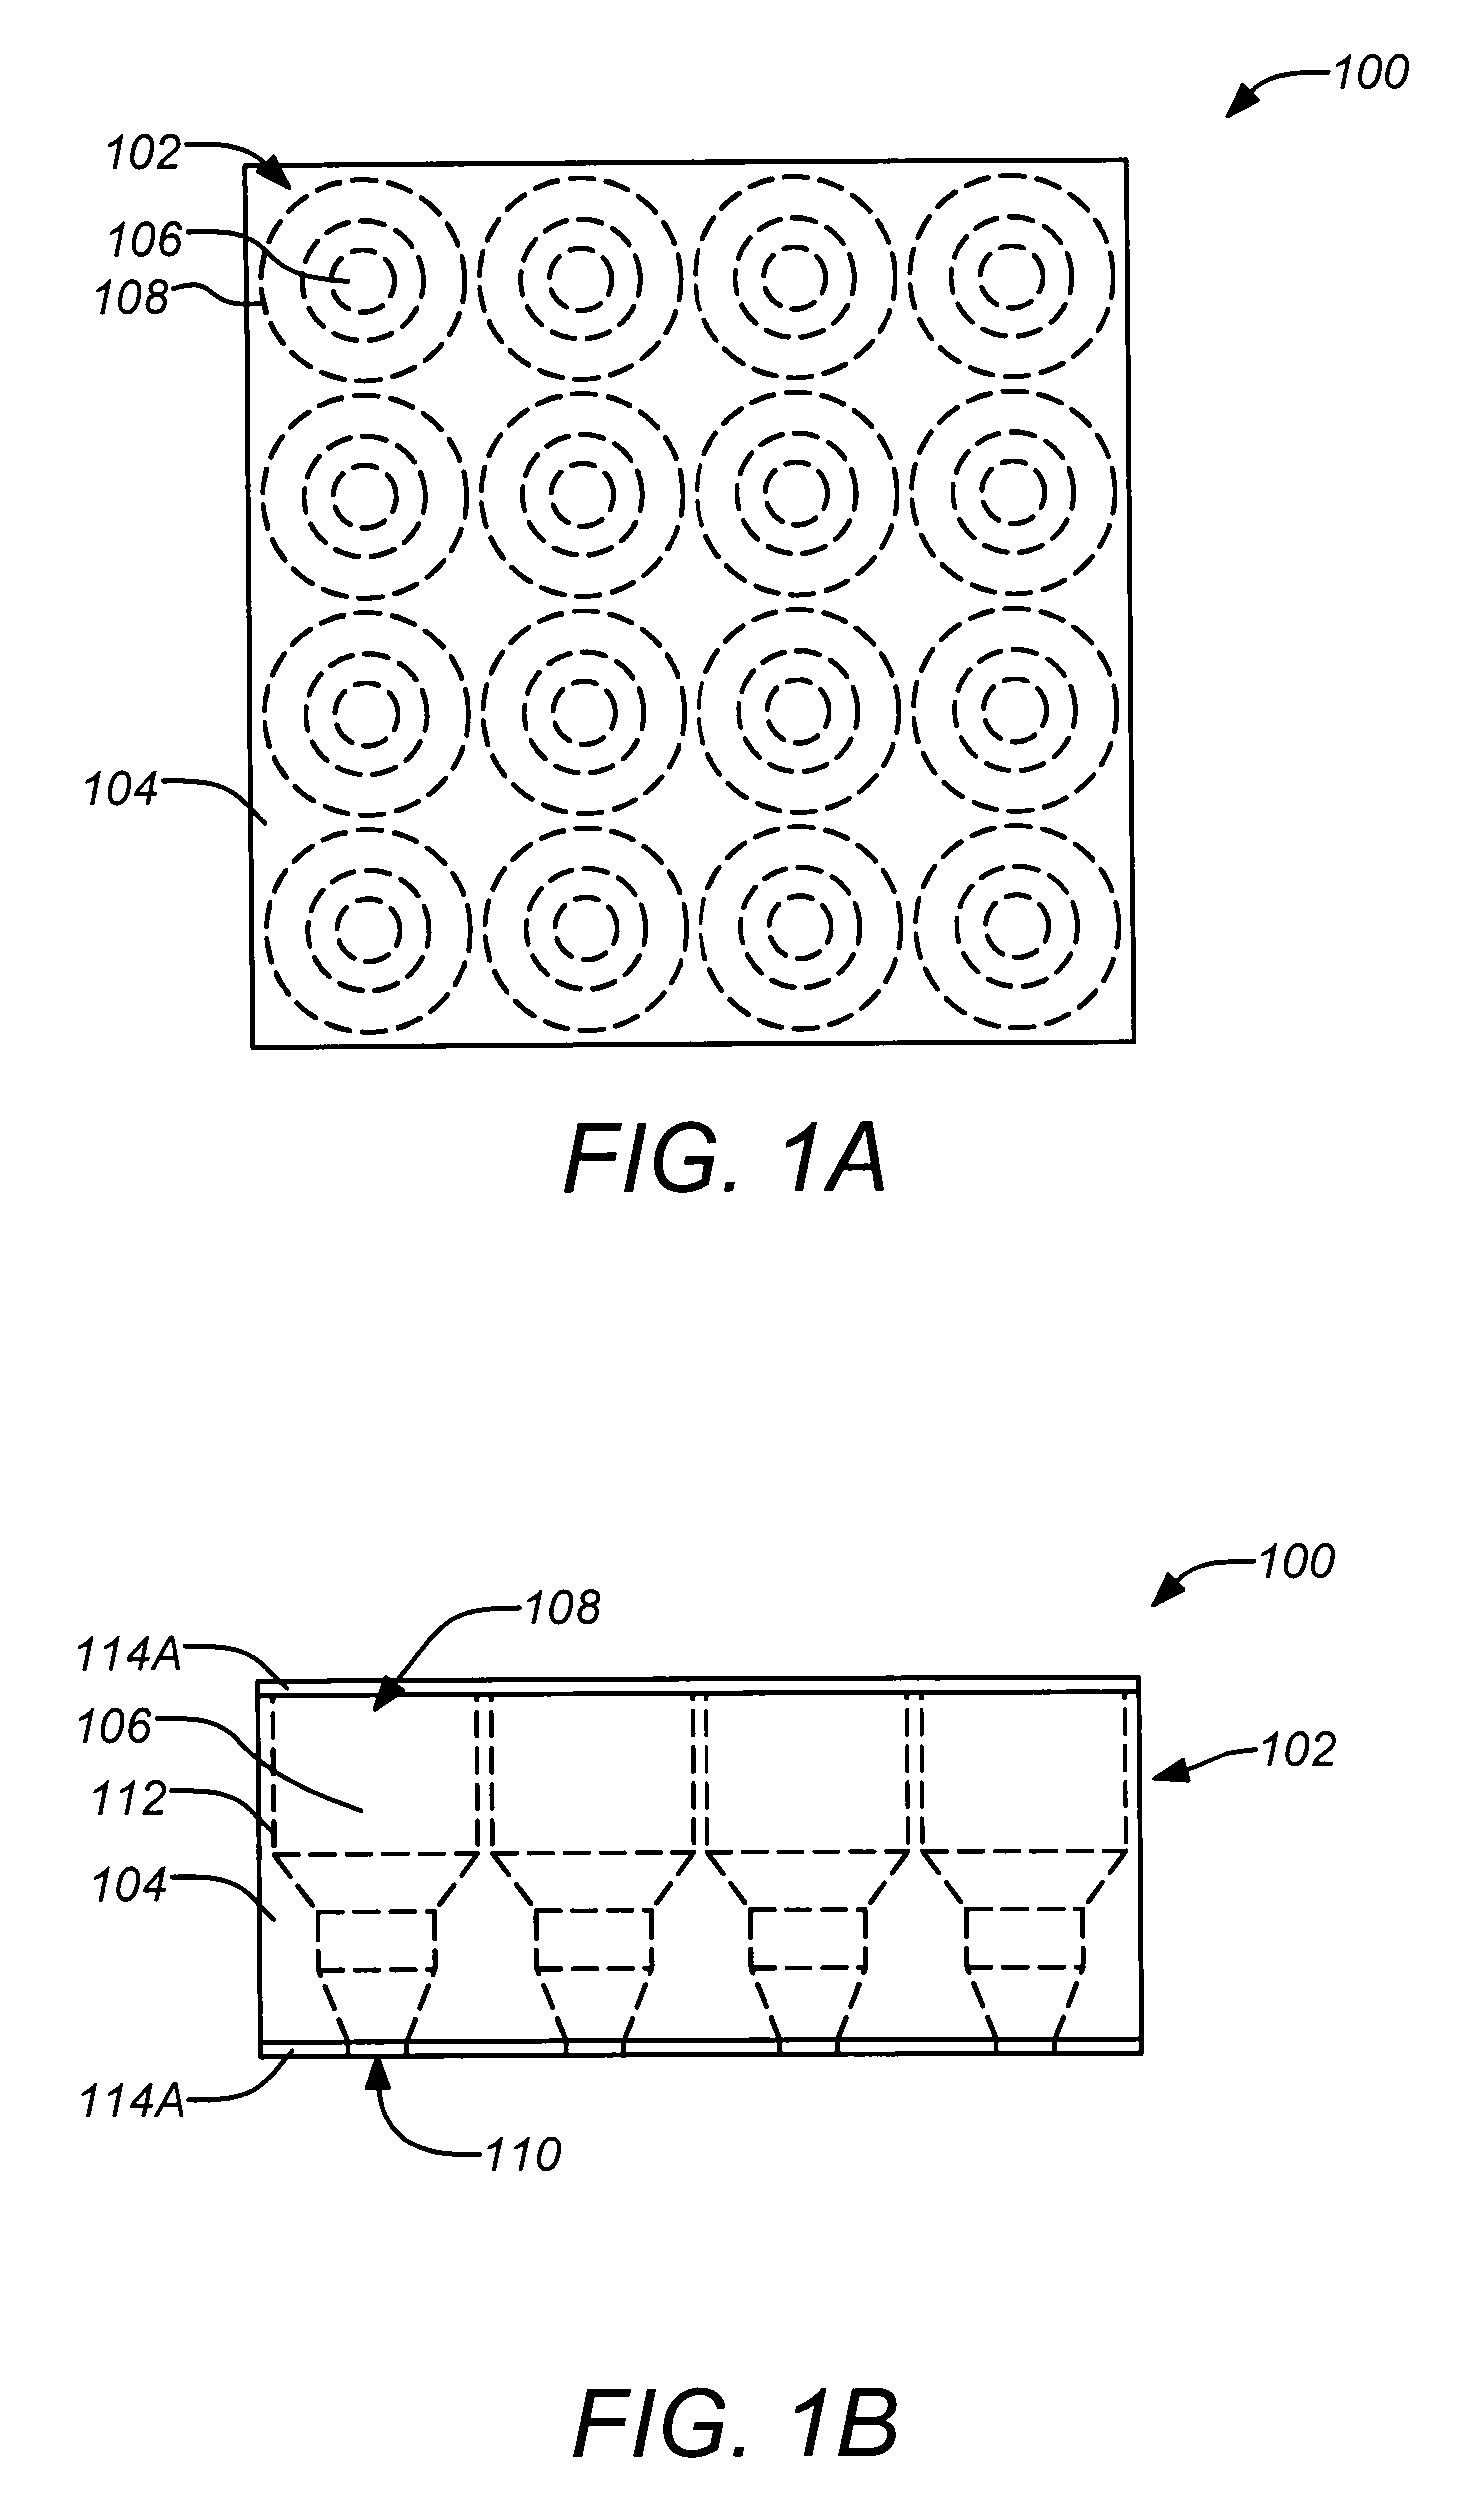 Structural feed aperture for space based phased array antennas